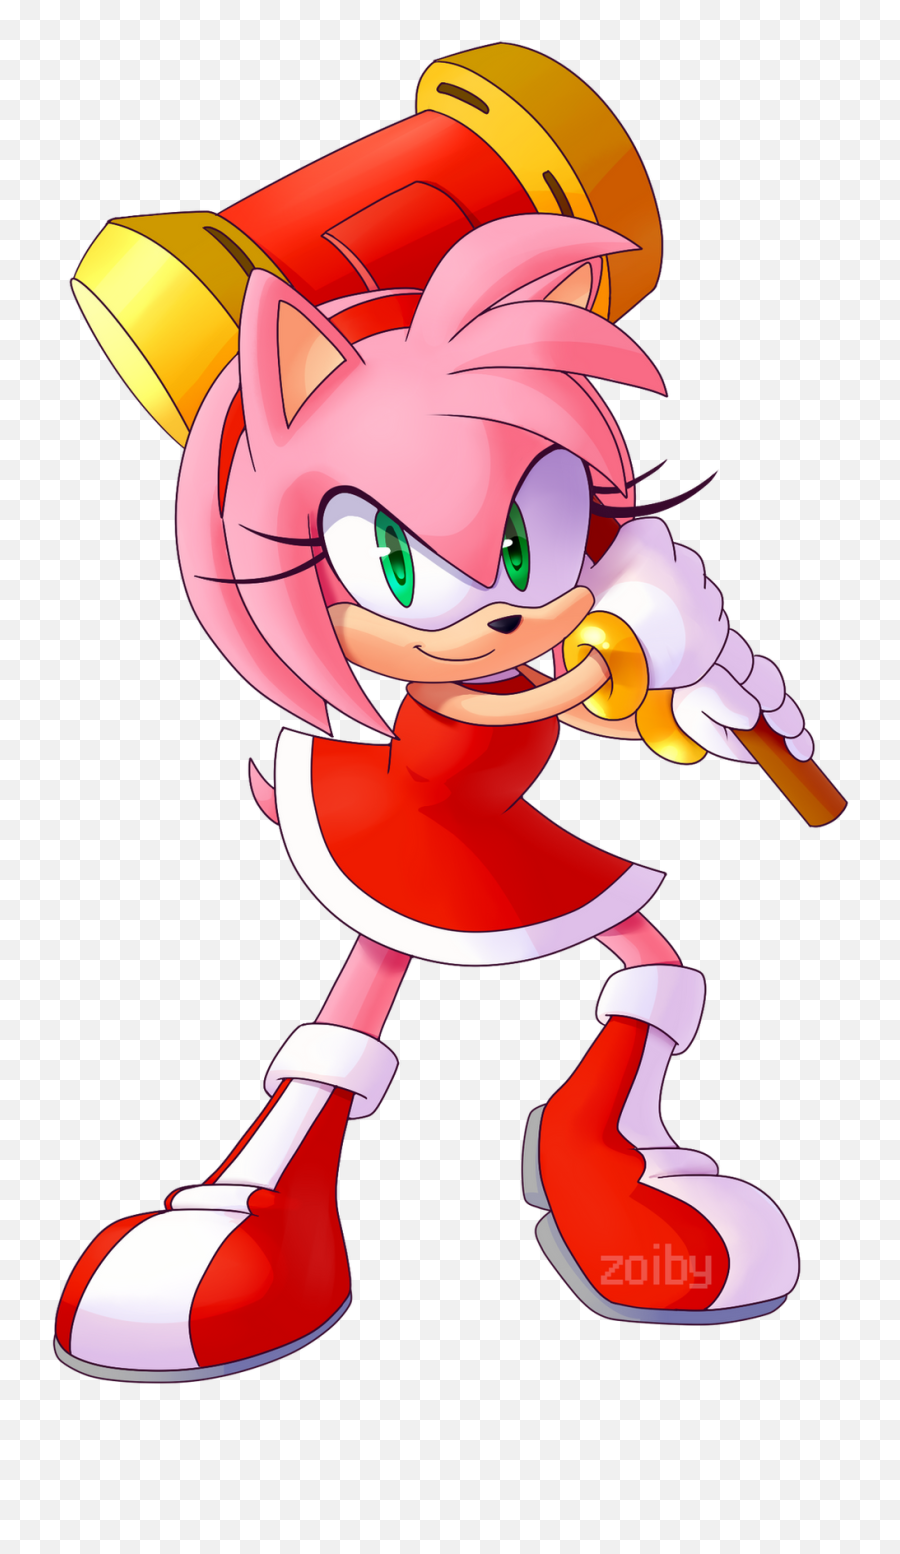 Who Would Win In A Fight Peach Or Amy Rose - Quora Emoji,Super Princess Peach All Emotions